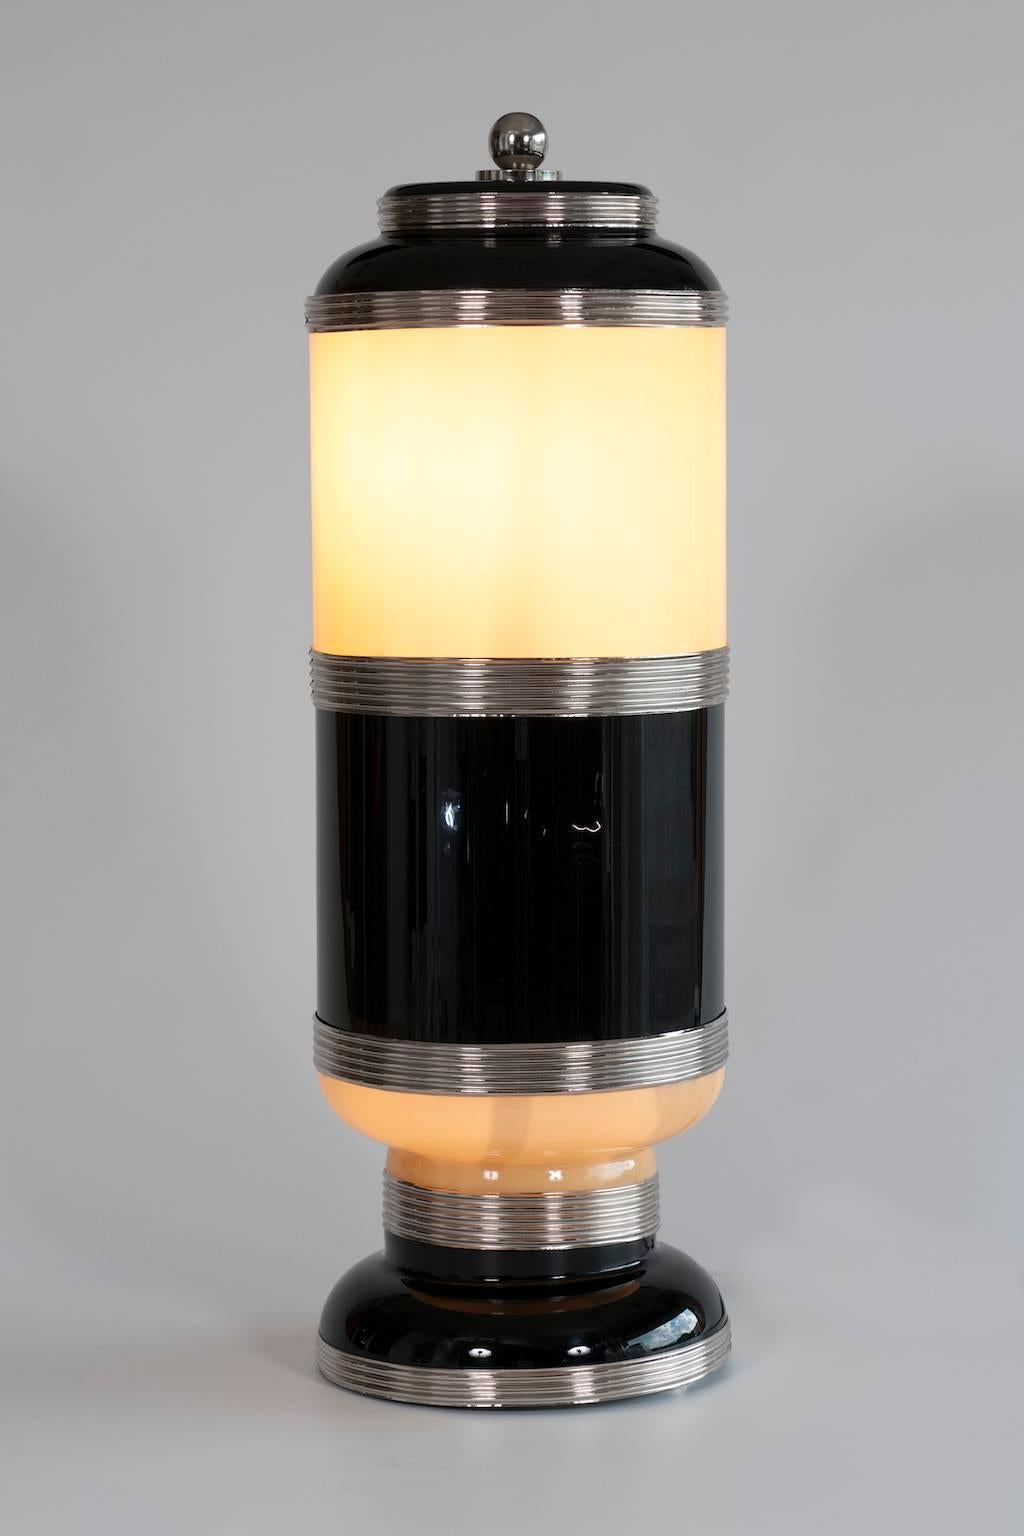 Giant  Pair of Italian Table Lamps in Murano glass Black and Cream color  1960s For Sale 1